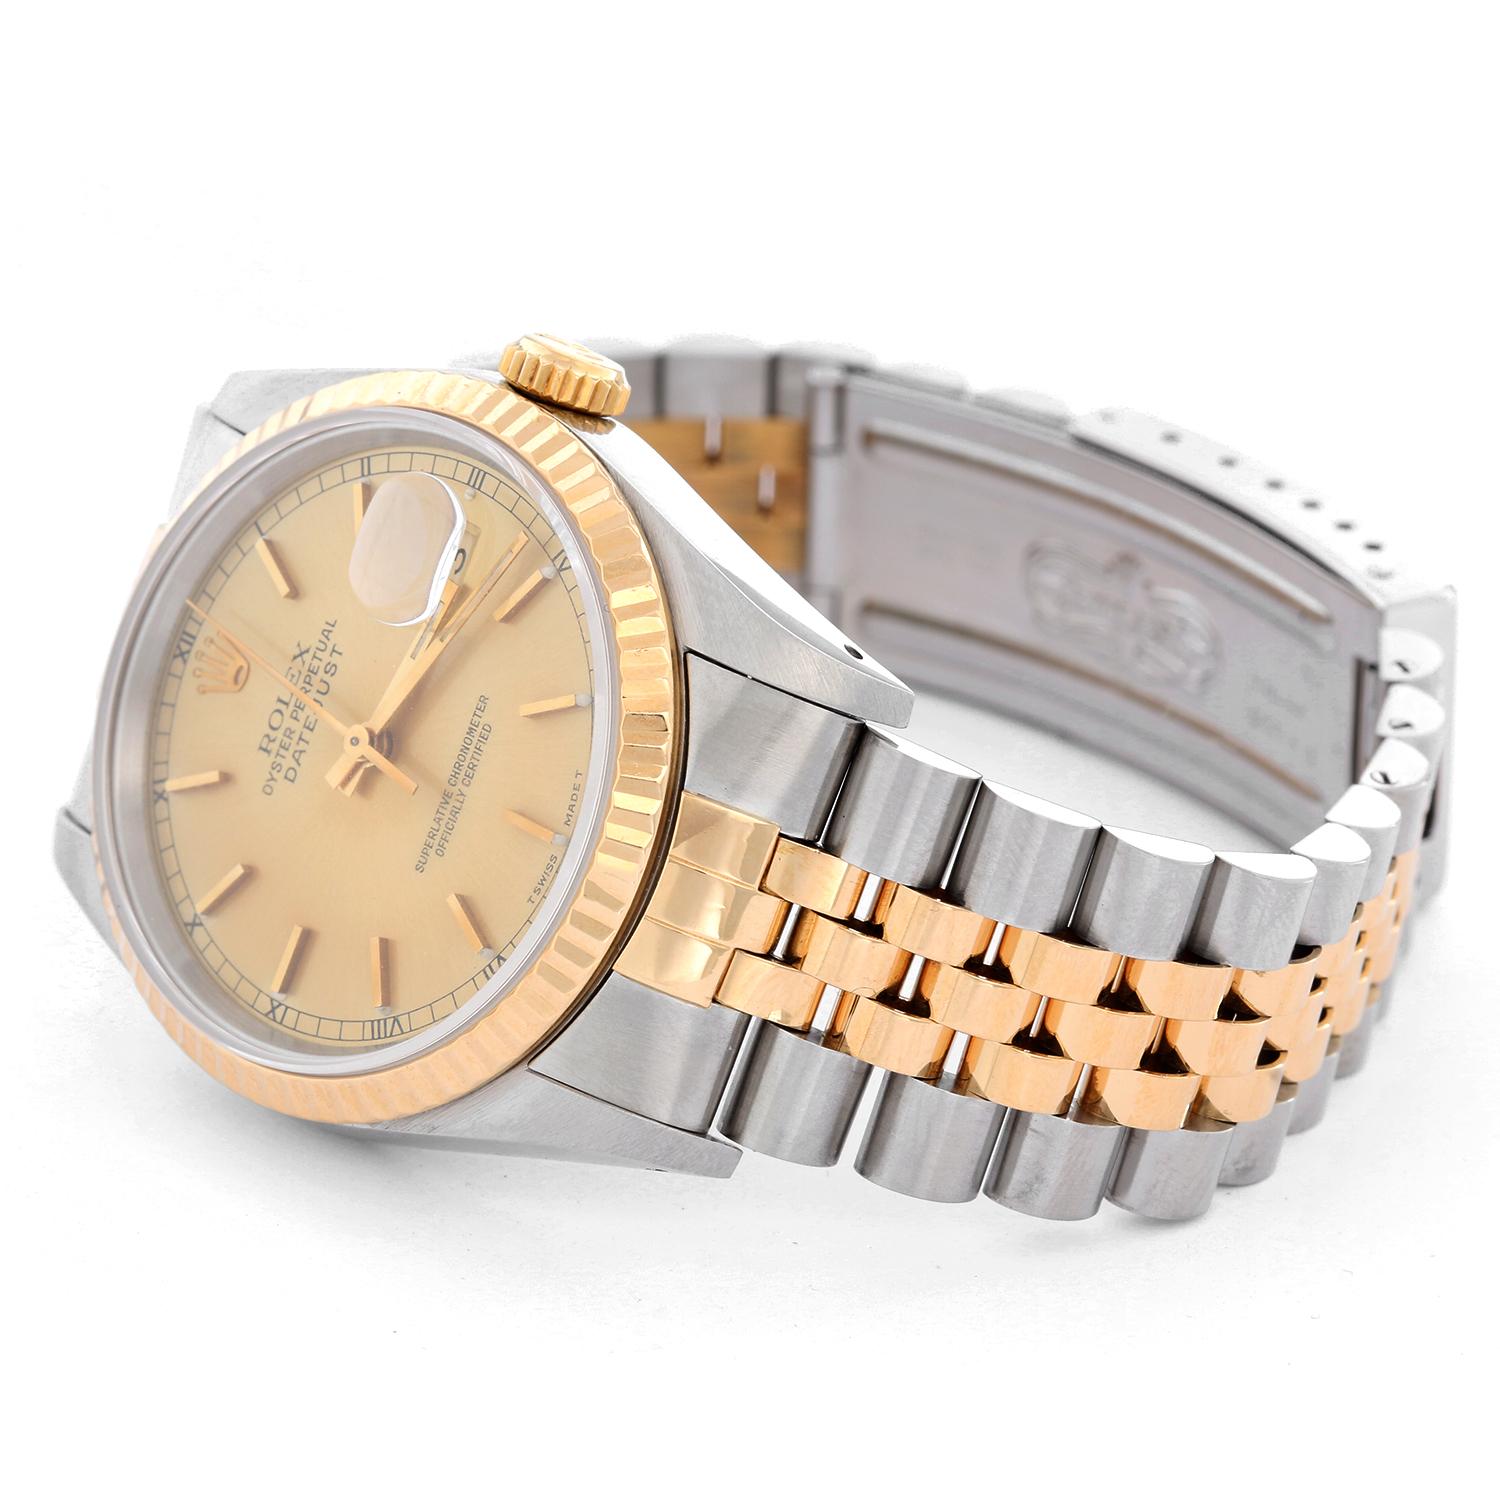 Rolex Datejust Men's 2-Tone Watch 16233 - Automatic winding, 31 jewels, Quickset, sapphire crystal. Stainless steel case with18k yellow gold fluted bezel . Champagne stick dial. Stainless steel and 18k yellow gold Jubilee bracelet. Pre-owned with